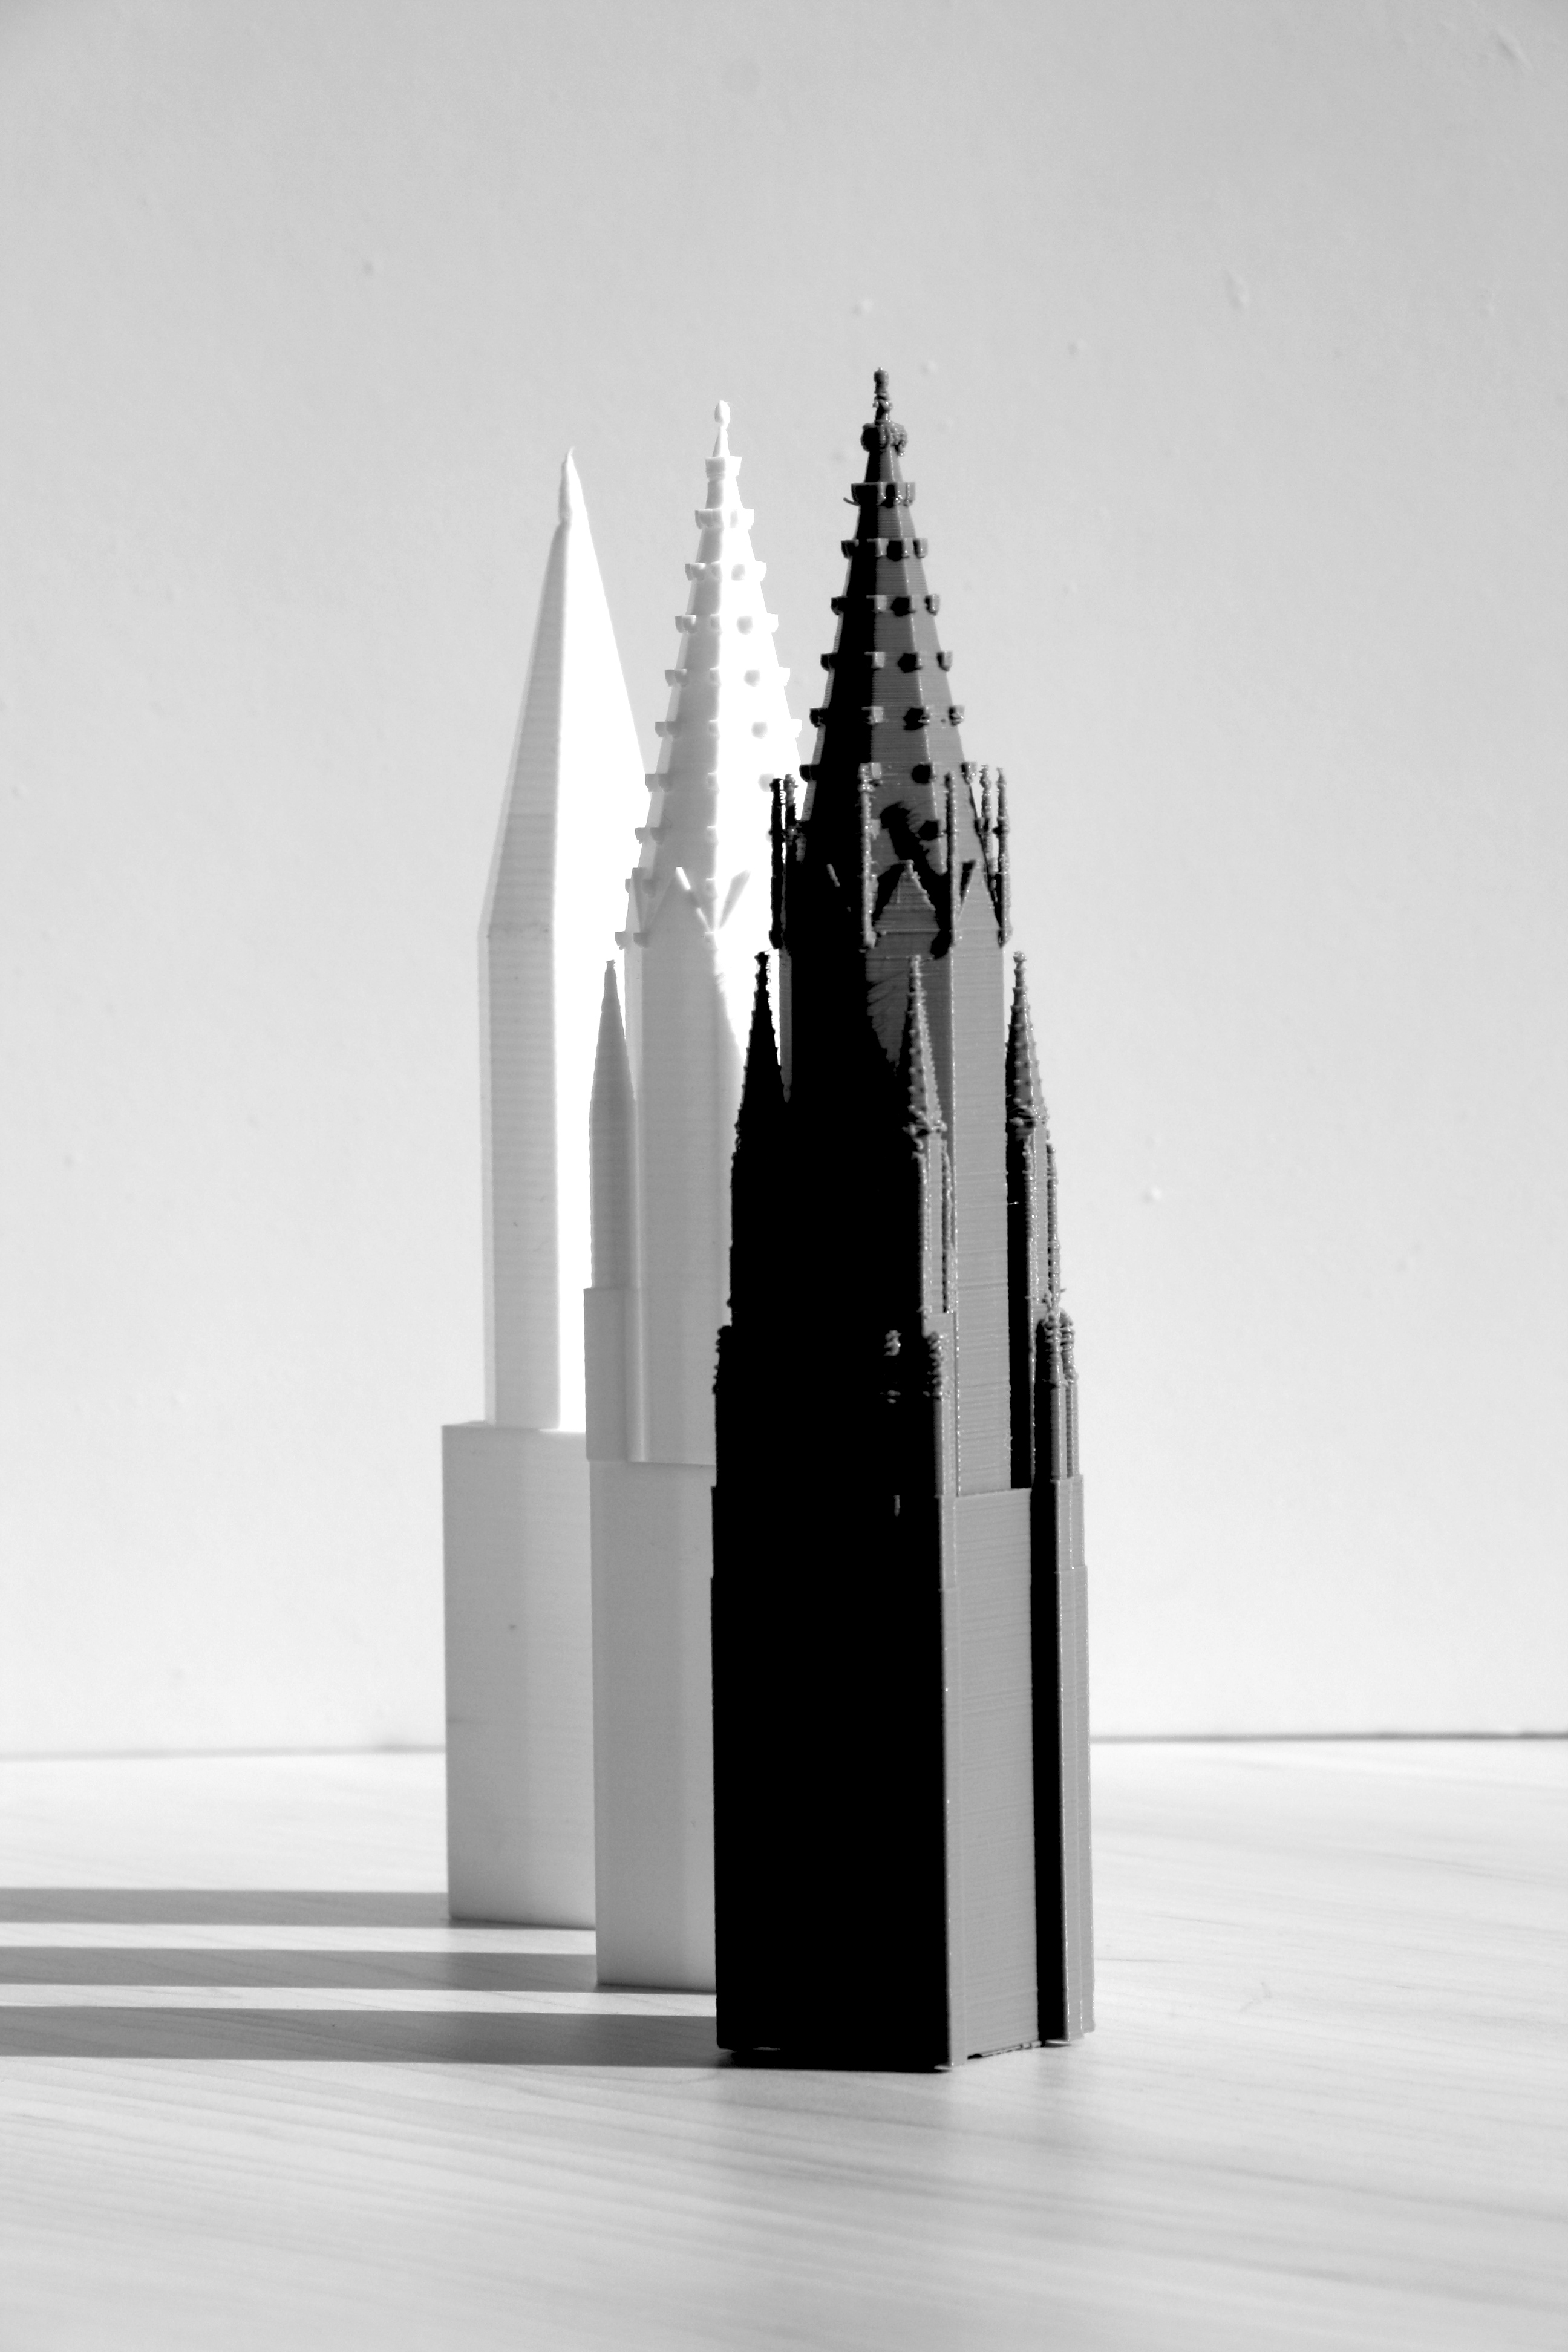 The 1st, 4th and 7th tower of the previous image scaled to the same size and 3D printed. The printing was concluded at the University of Debrecen, Department of Civil Engineering